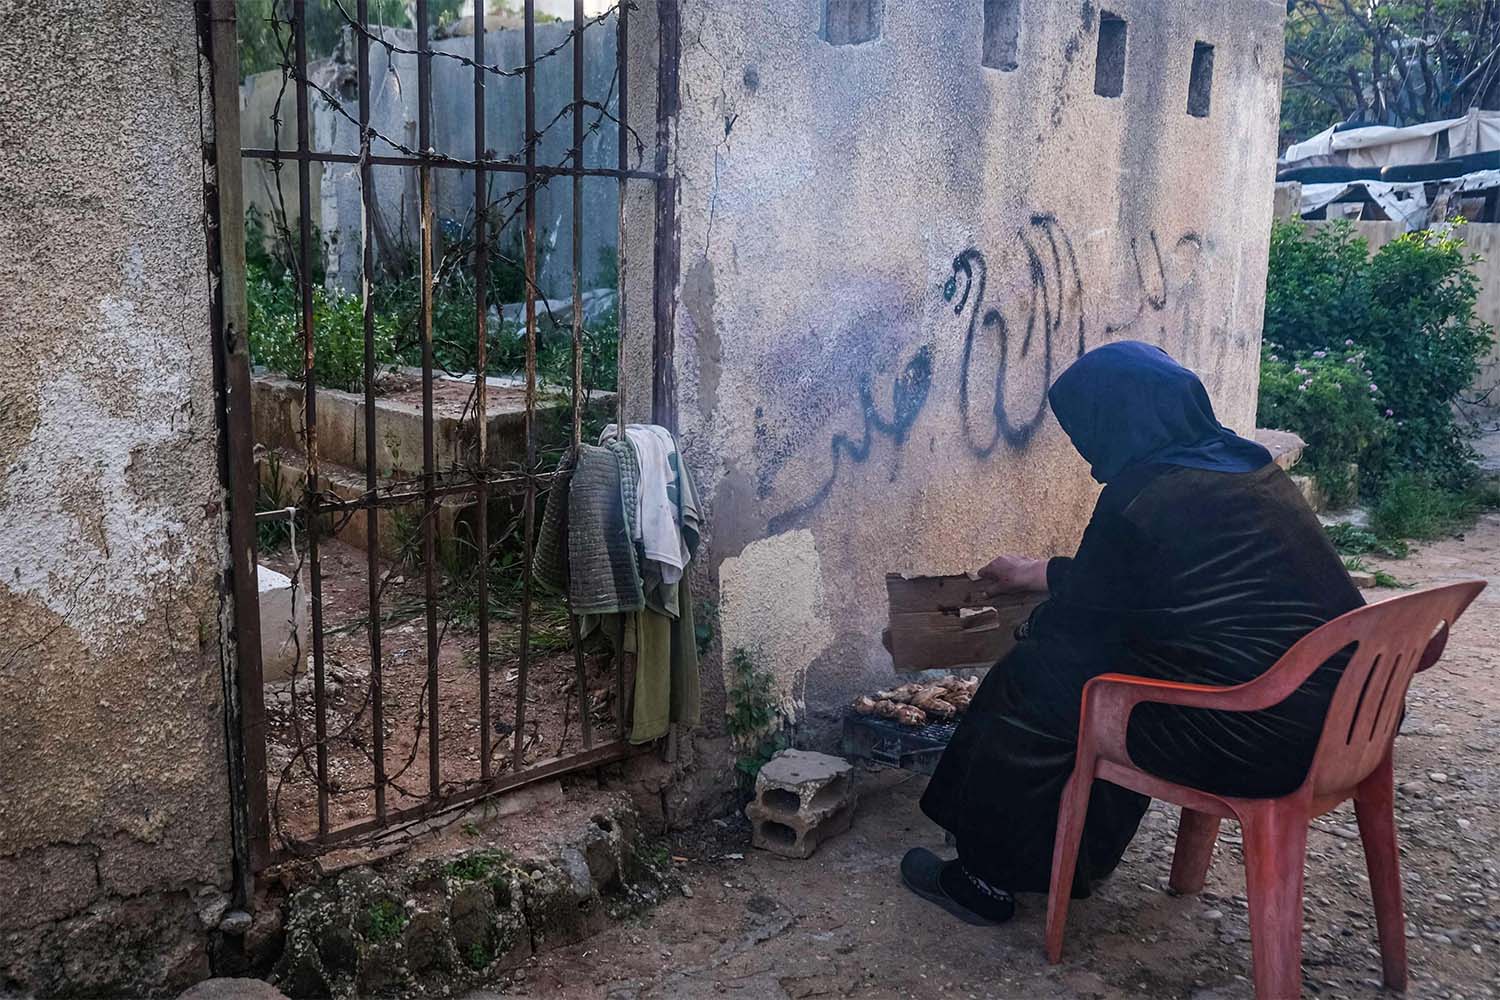 Lebanon’s crisis left more than half the country’s 6 million people living in poverty